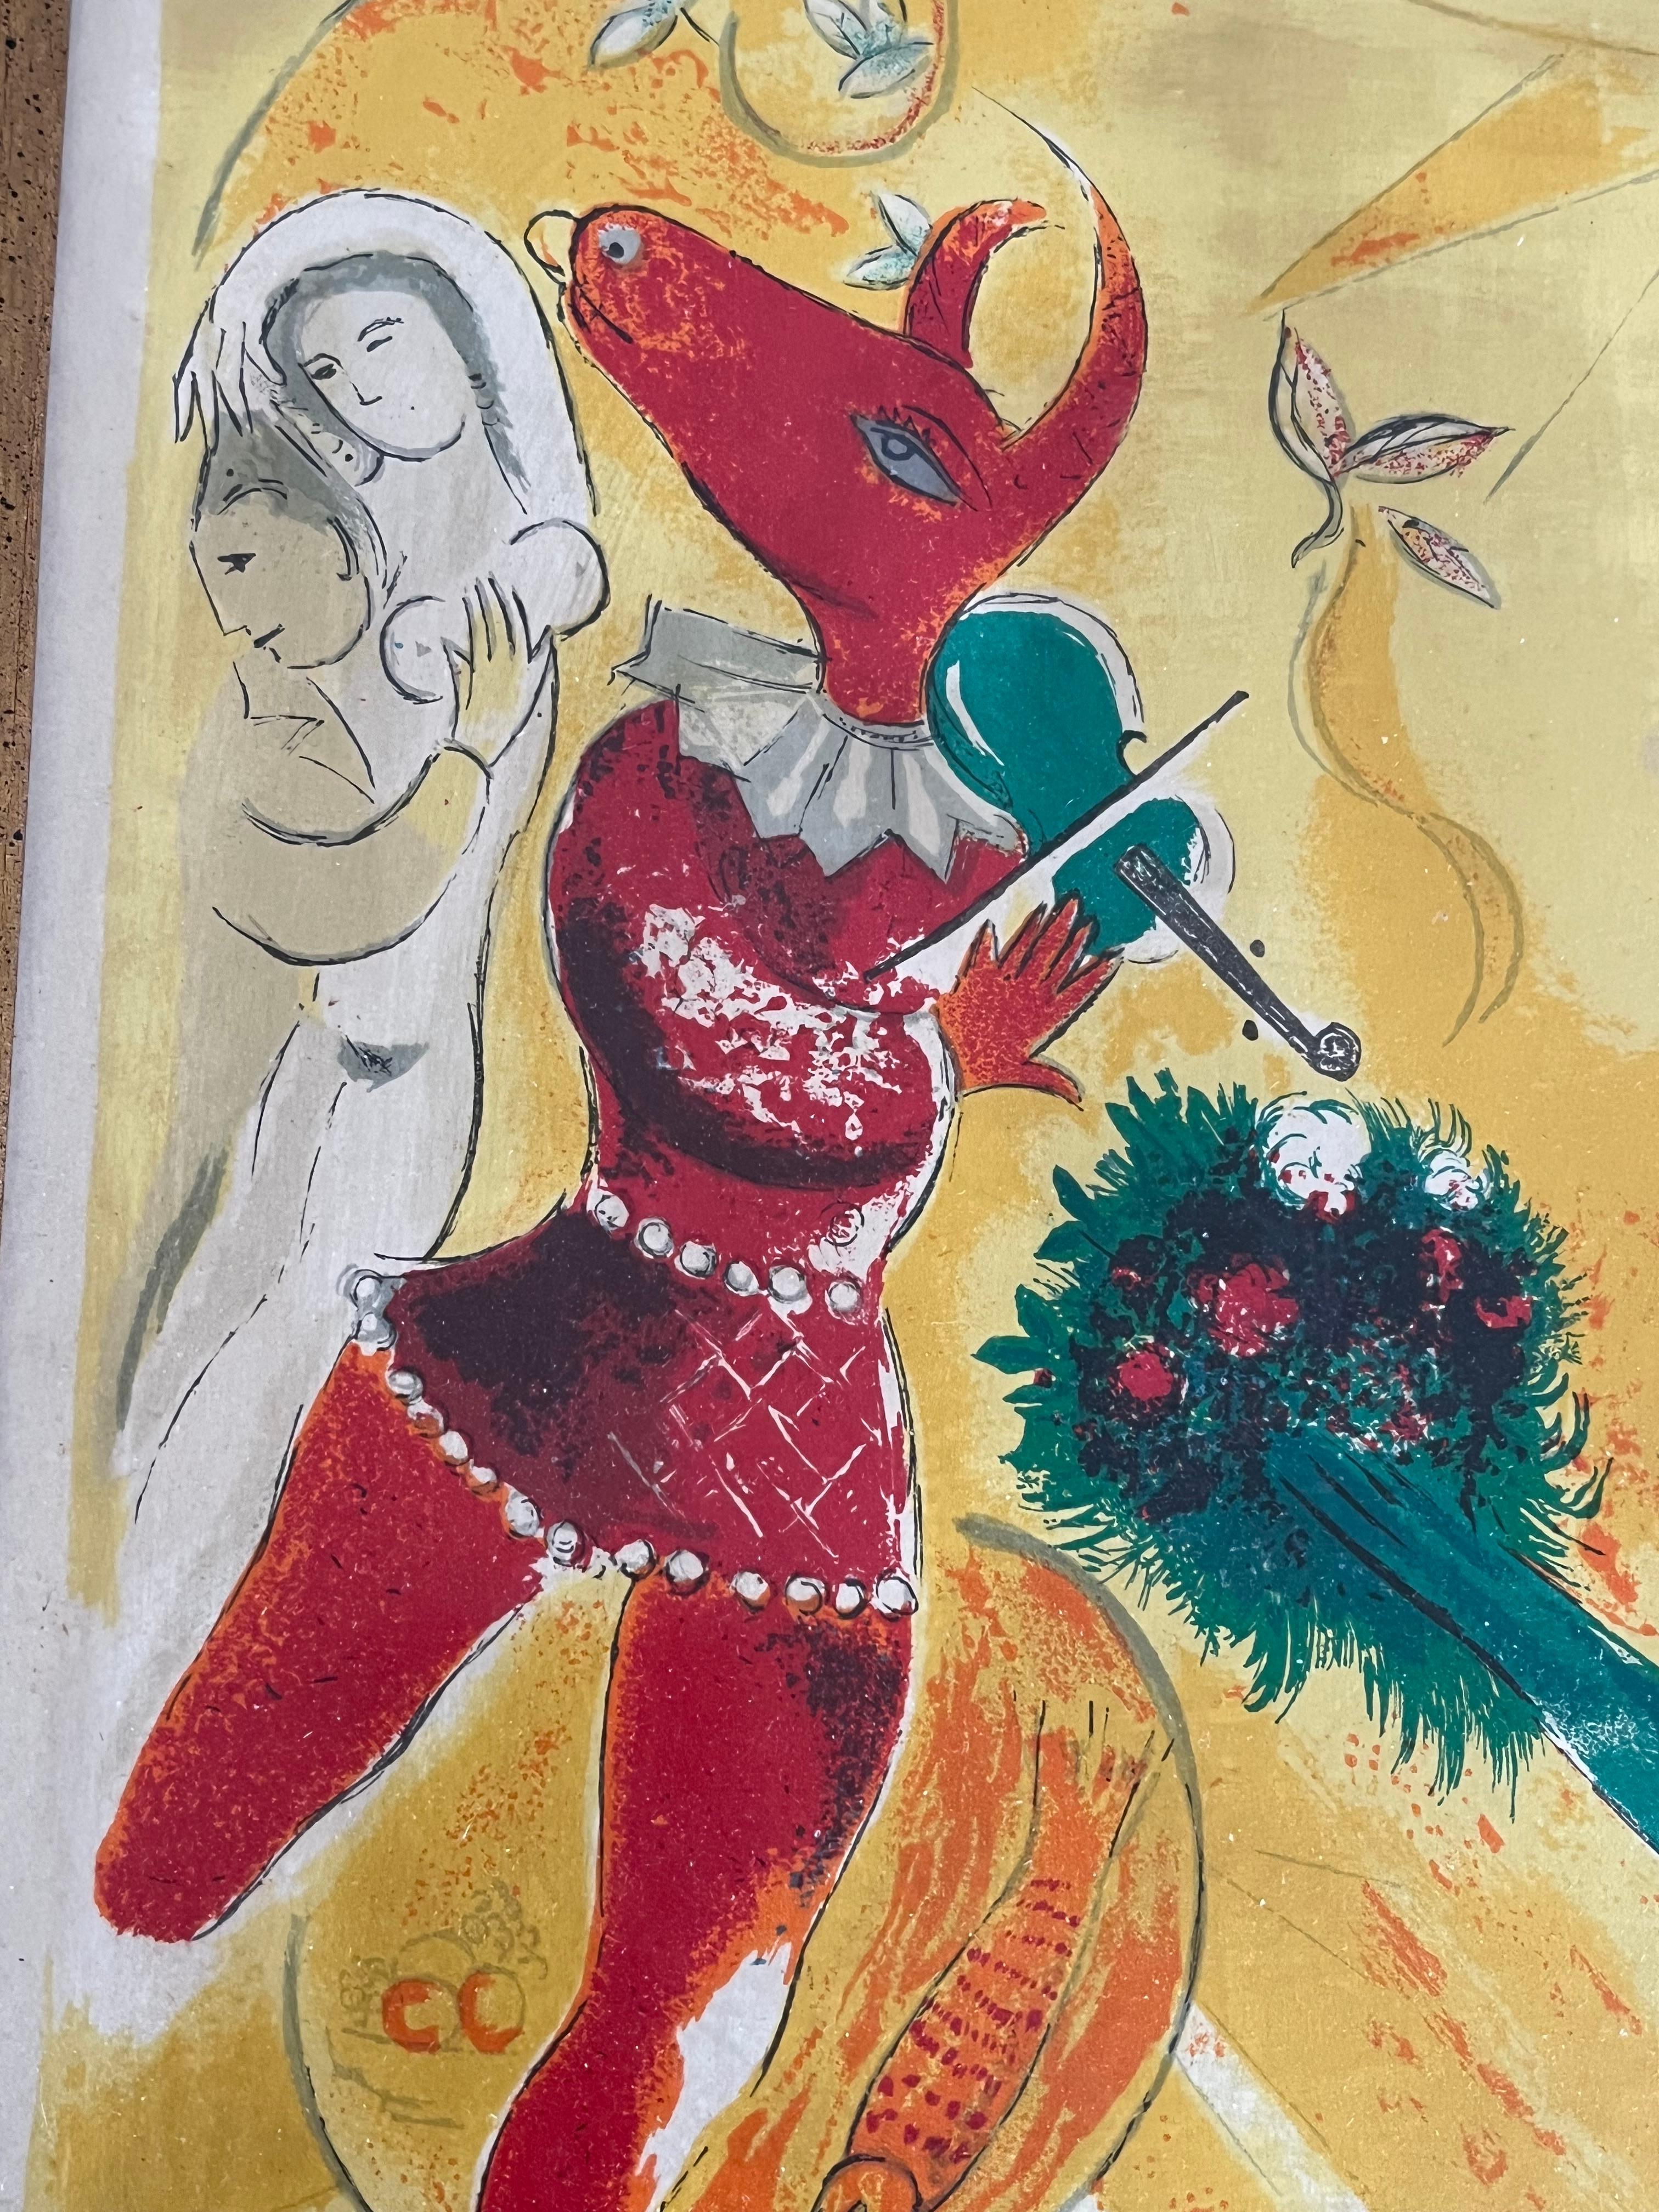 Paper Marc Chagall “The Dance” 1950 Litho For Sale